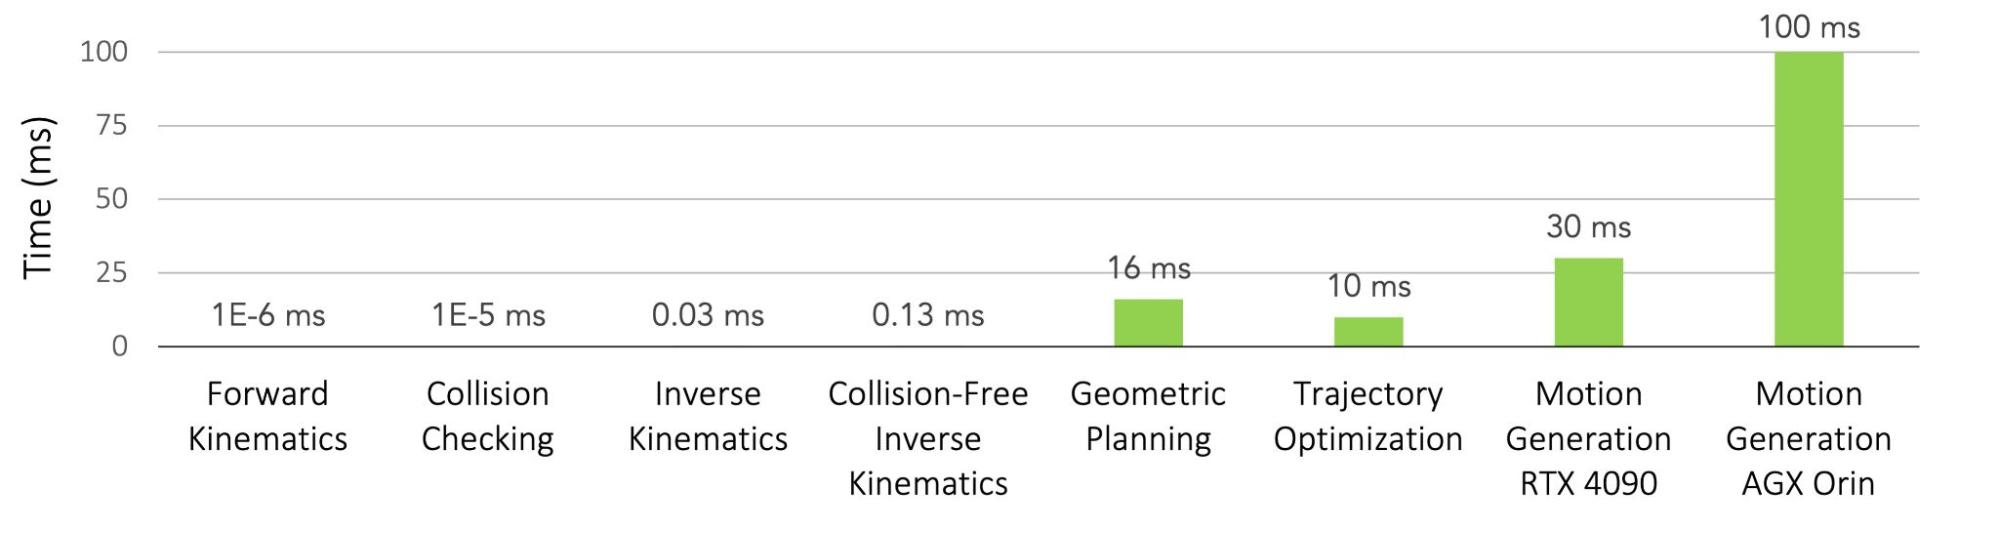 Bar chart shows compute time for Forward Kinematics, Collision Checking, Inverse Kinematics, Collision-Free Inverse Kinematics, Geometric Planning, Motion Generation on NVIDIA RTX 4090, and Motion Generation on NVIDIA AGX Orin.